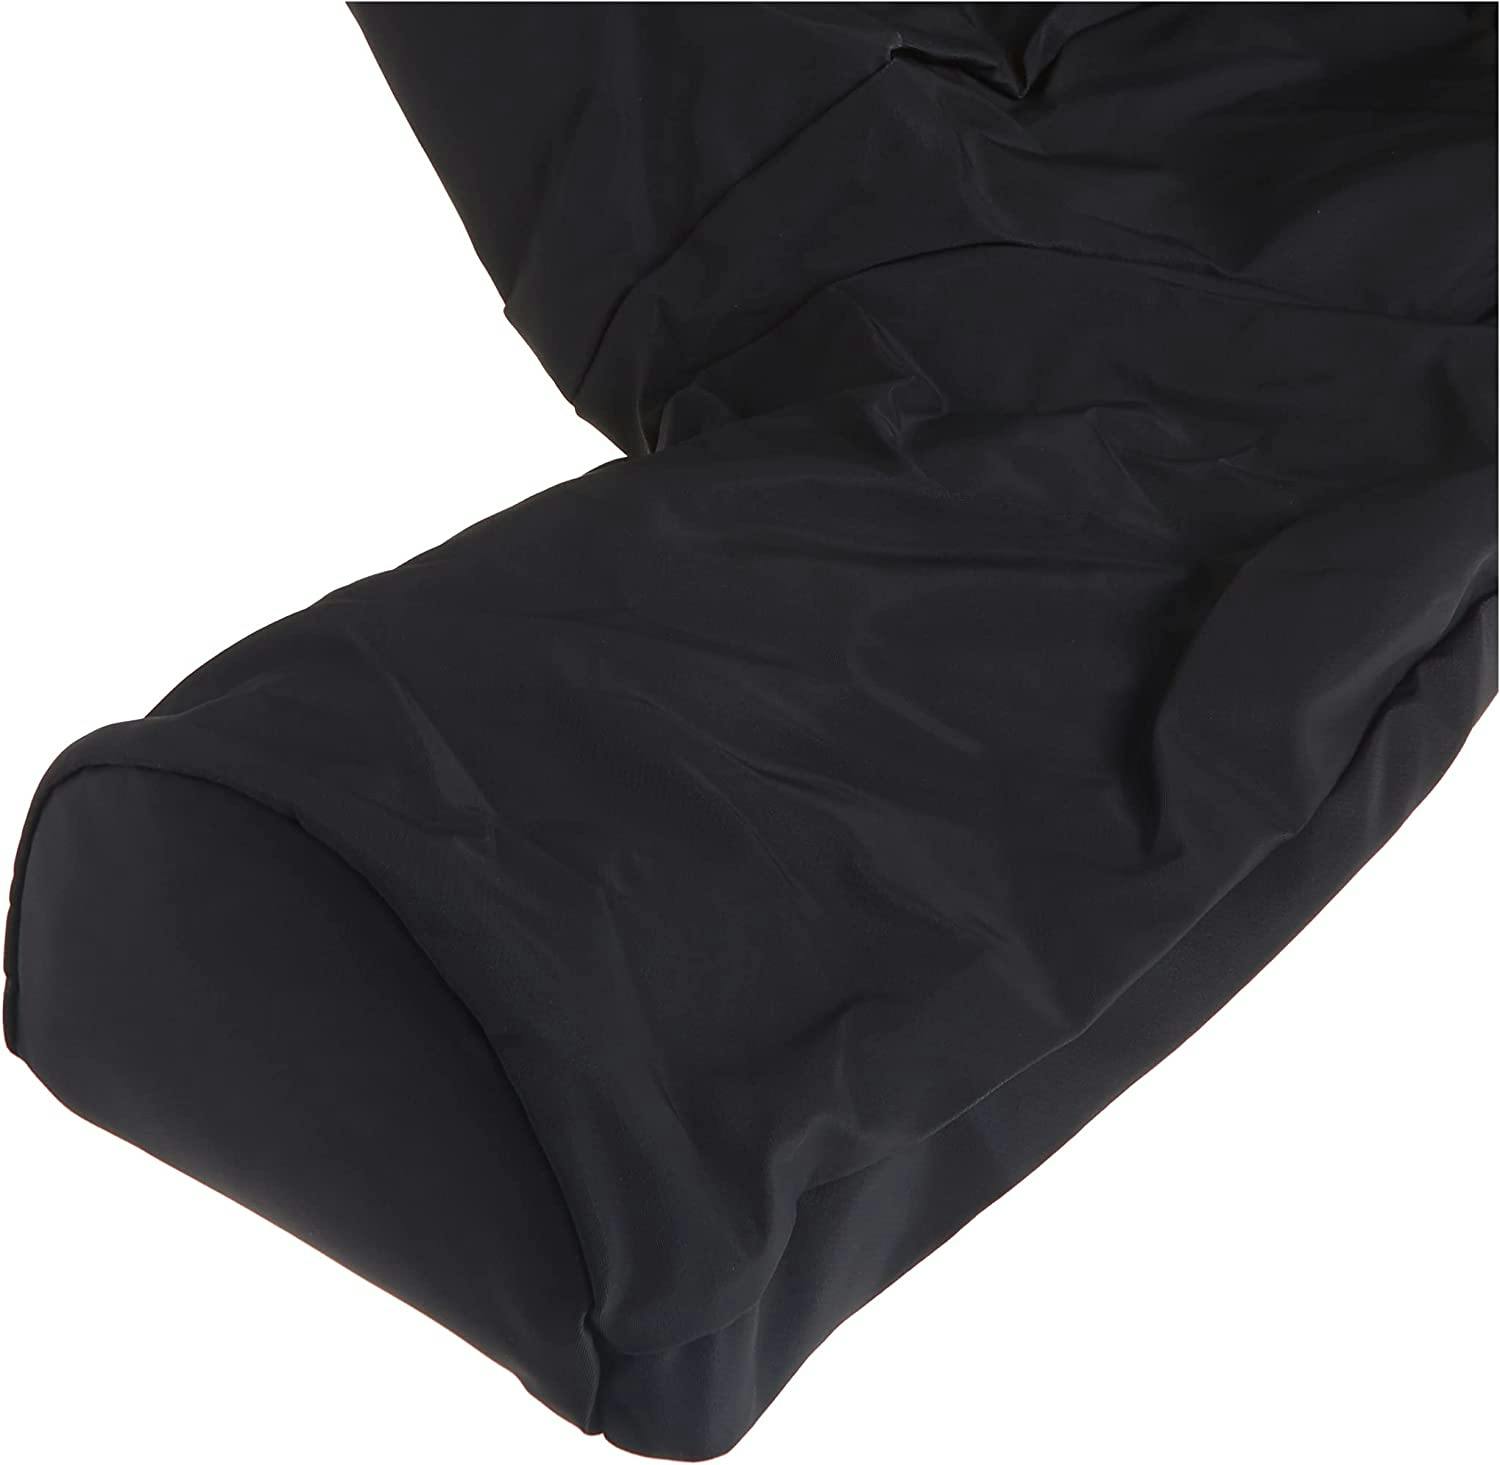 Traeger Full Length Grill Cover for Pro 780 Series Pellet Grills · 42 in.